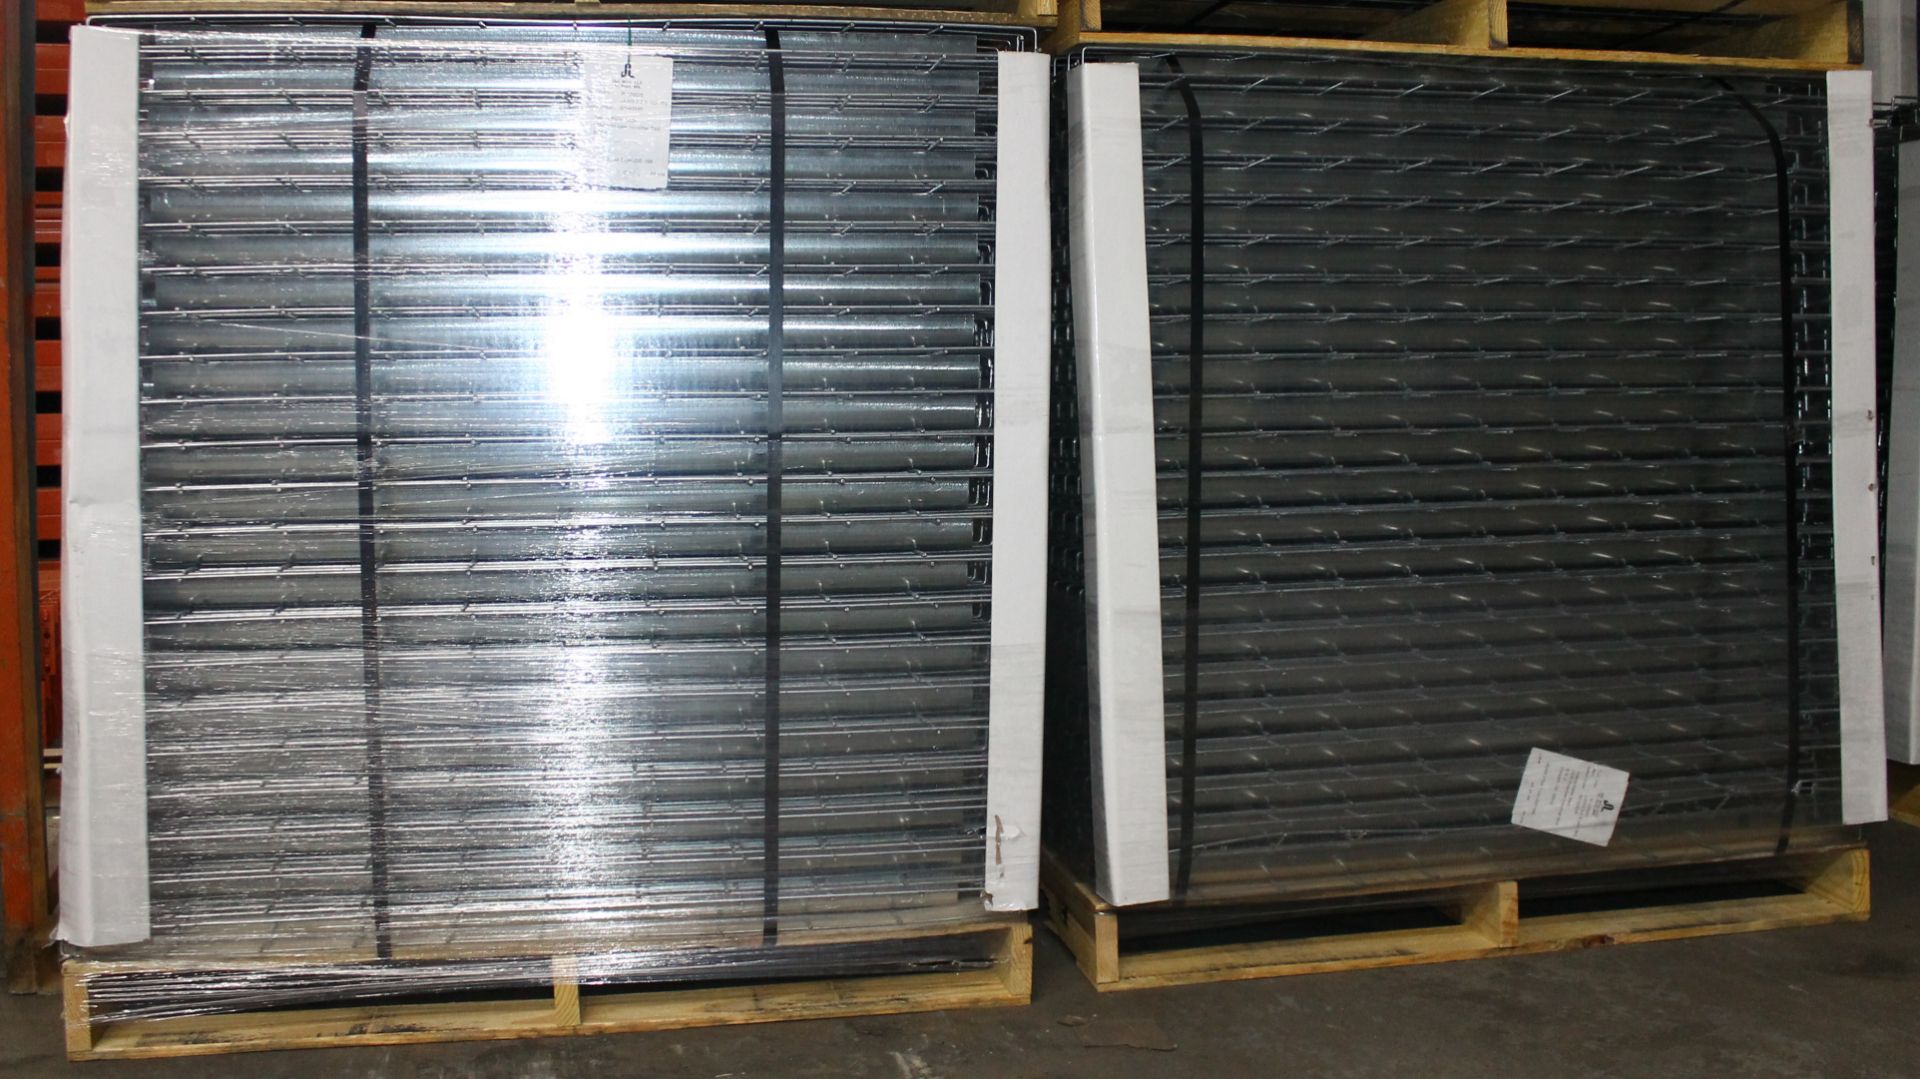 NEW 80 PCS OF STANDARD 42" X 52" WIREDECK - 2250 LBS CAPACITY